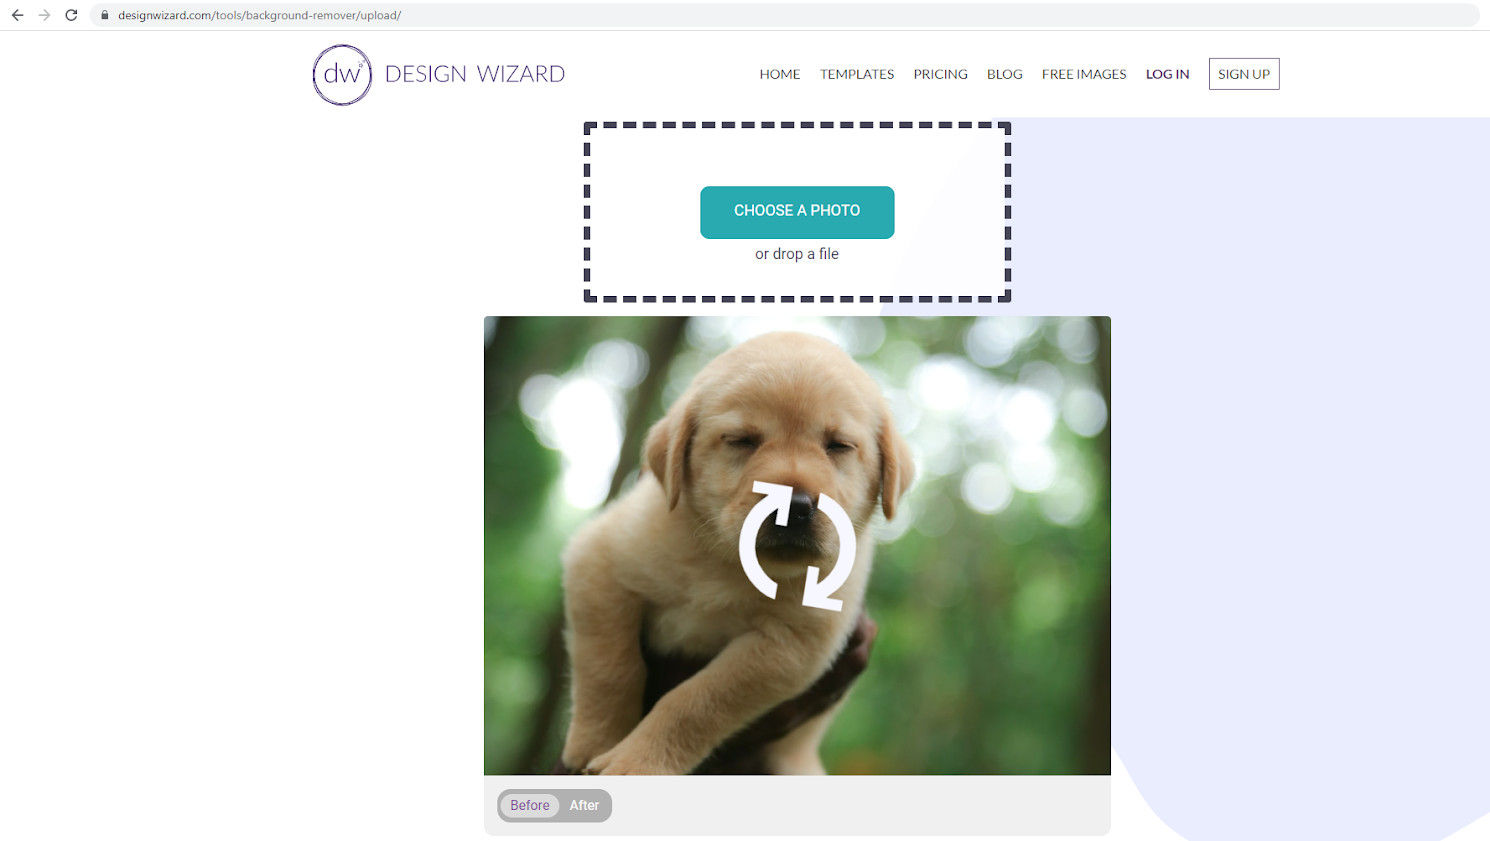 Screenshot of page with pic of a puppy